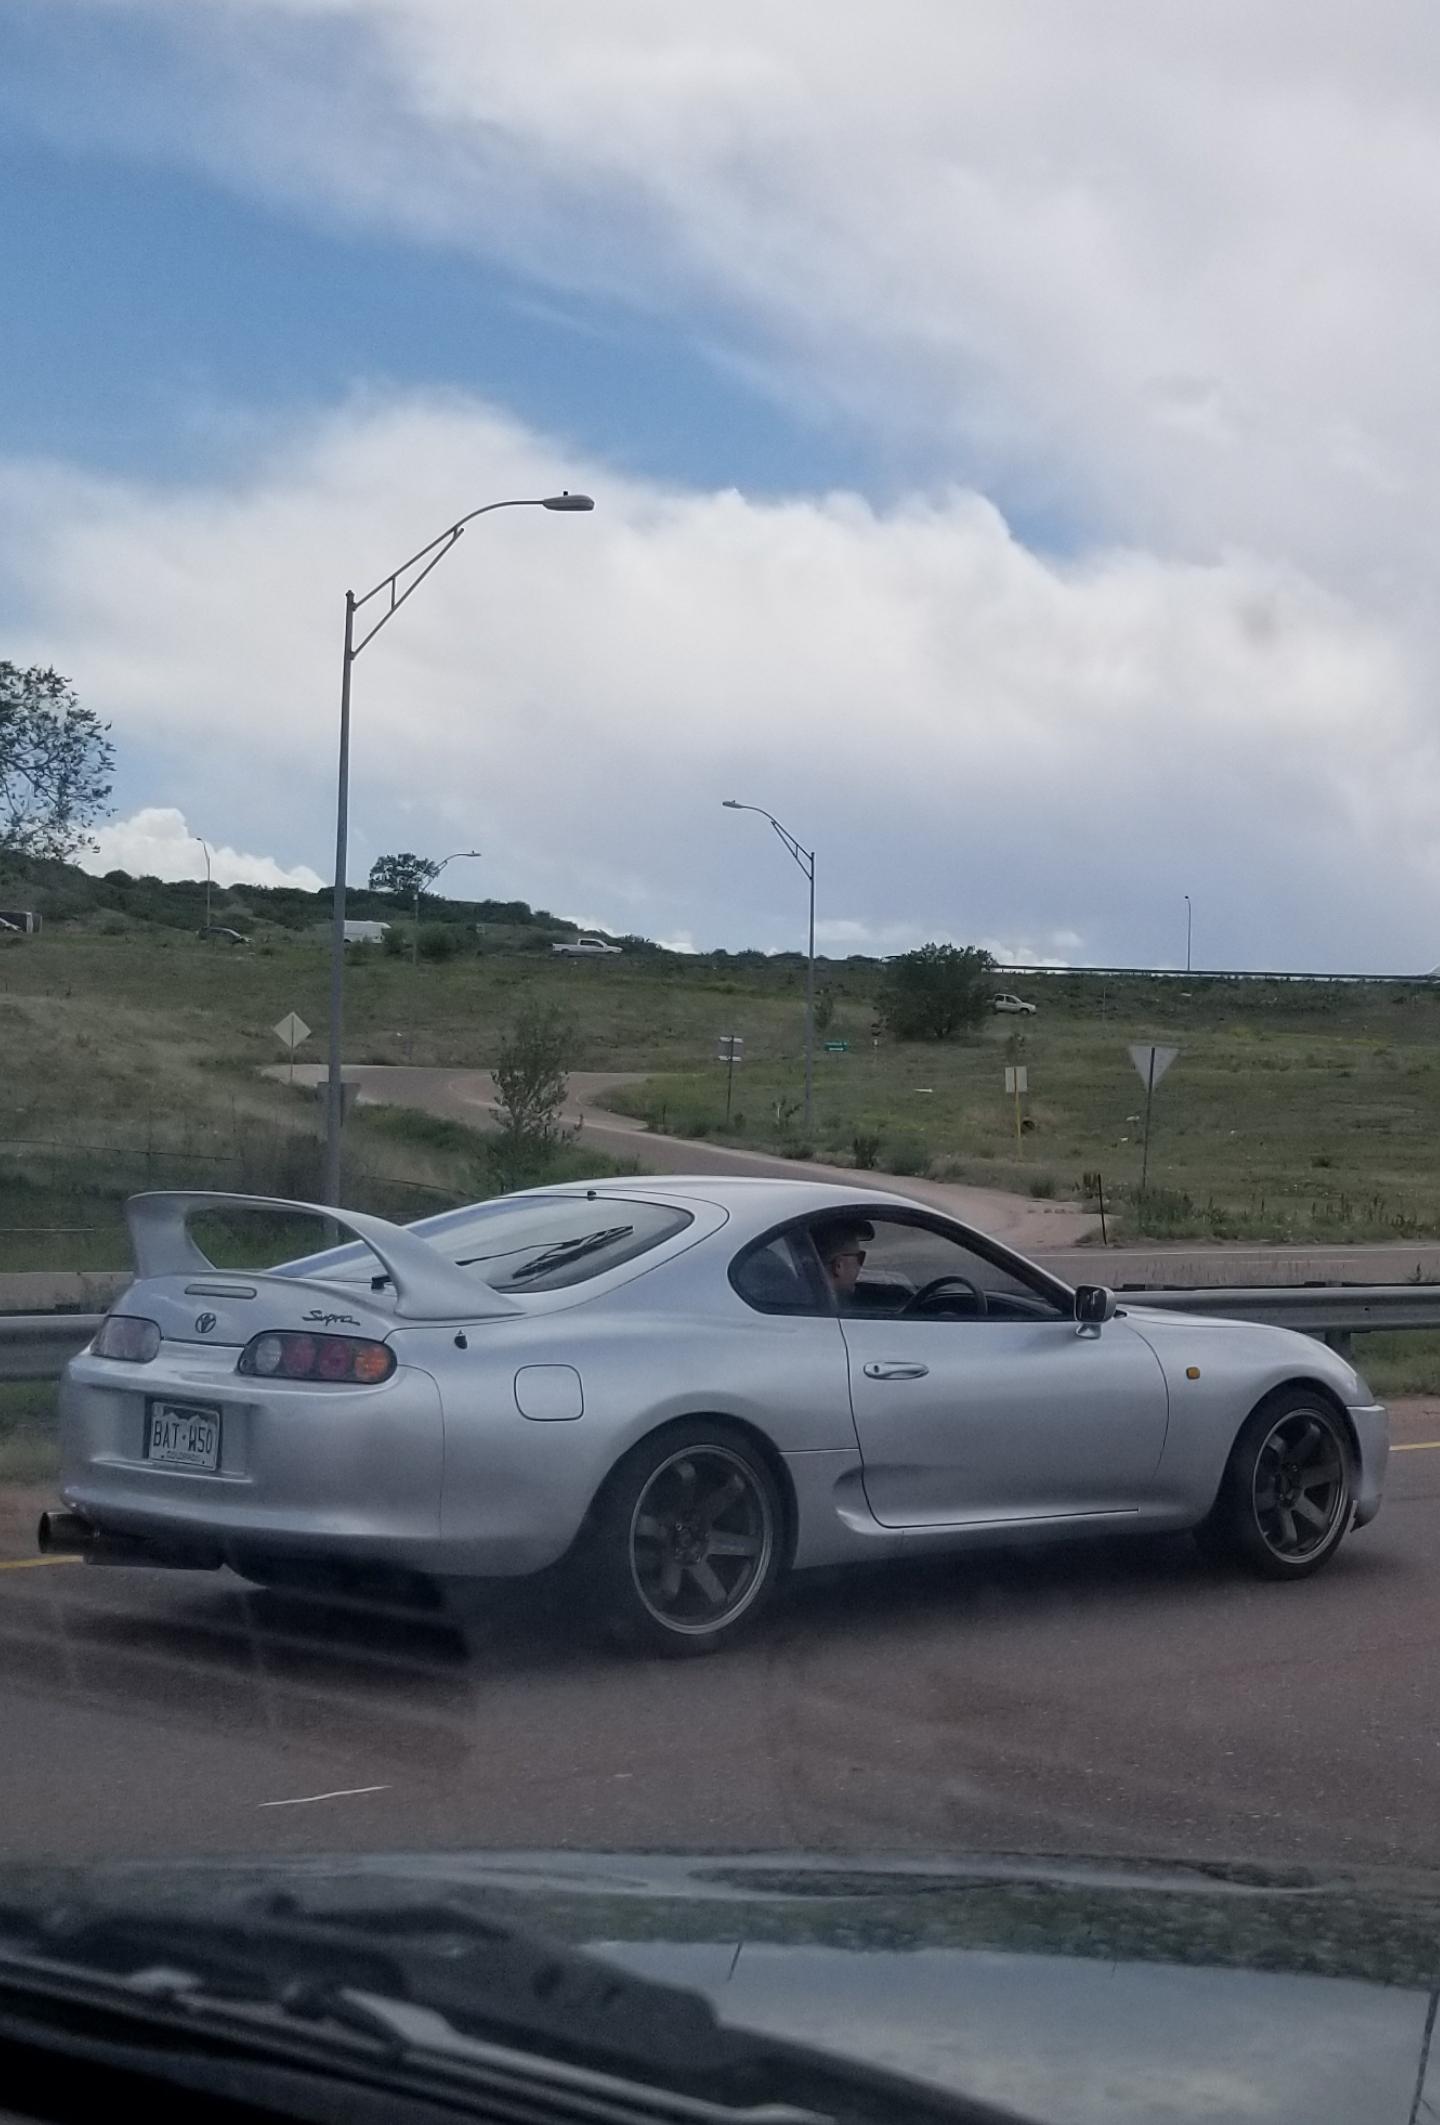 Found a Supra RZ on my way to go hiking with my family. It was rhd with I found pretty cool. This was my first time seeing a MK4 Supra in Colorado, but it Denver I see A90s everywhere up there.